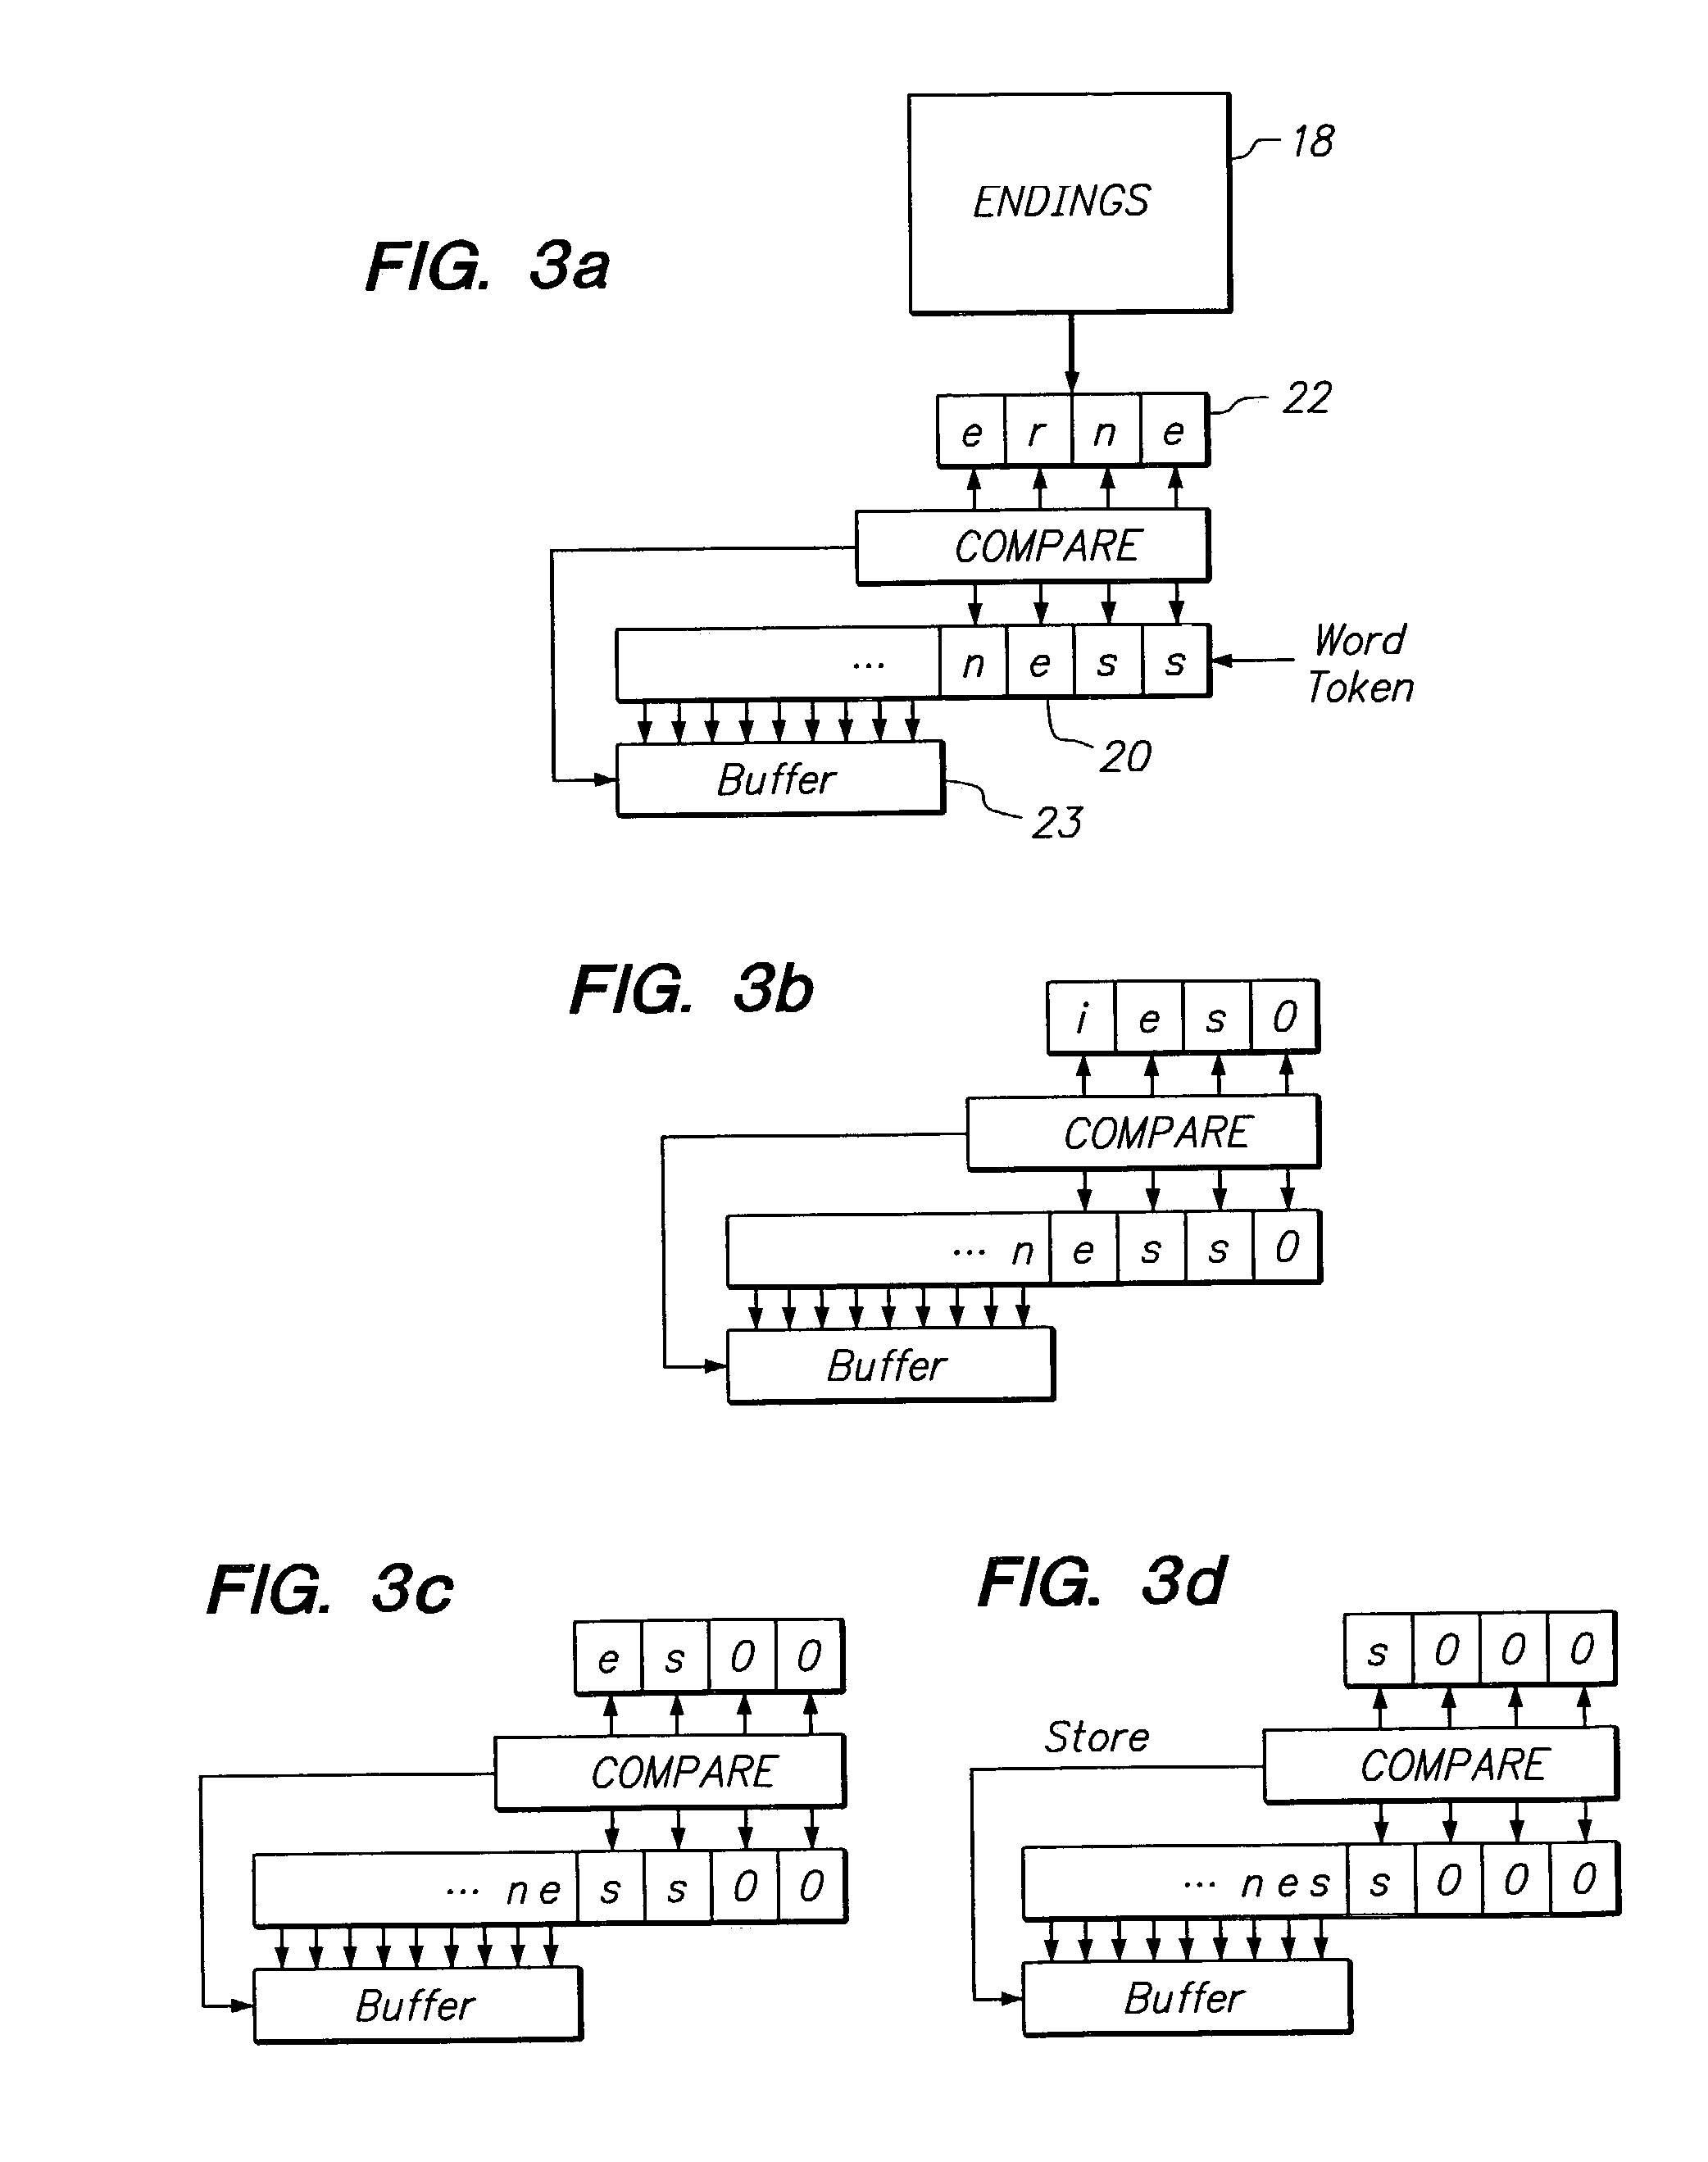 Multi-language document search and retrieval system